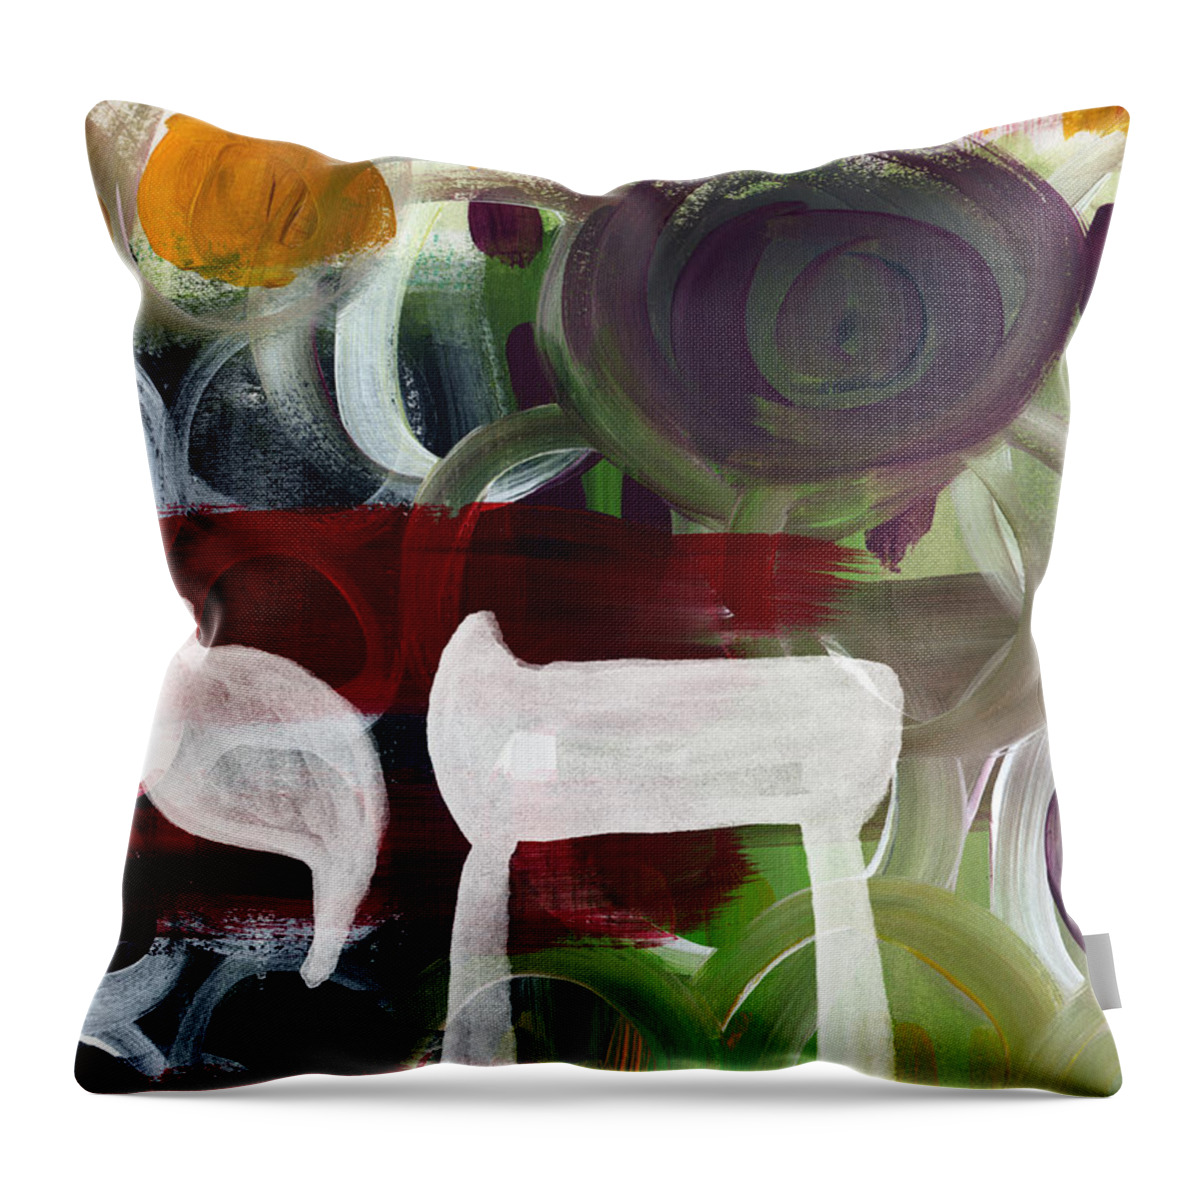 Hebrew Throw Pillow featuring the painting Passages 2- Abstract art by Linda Woods by Linda Woods